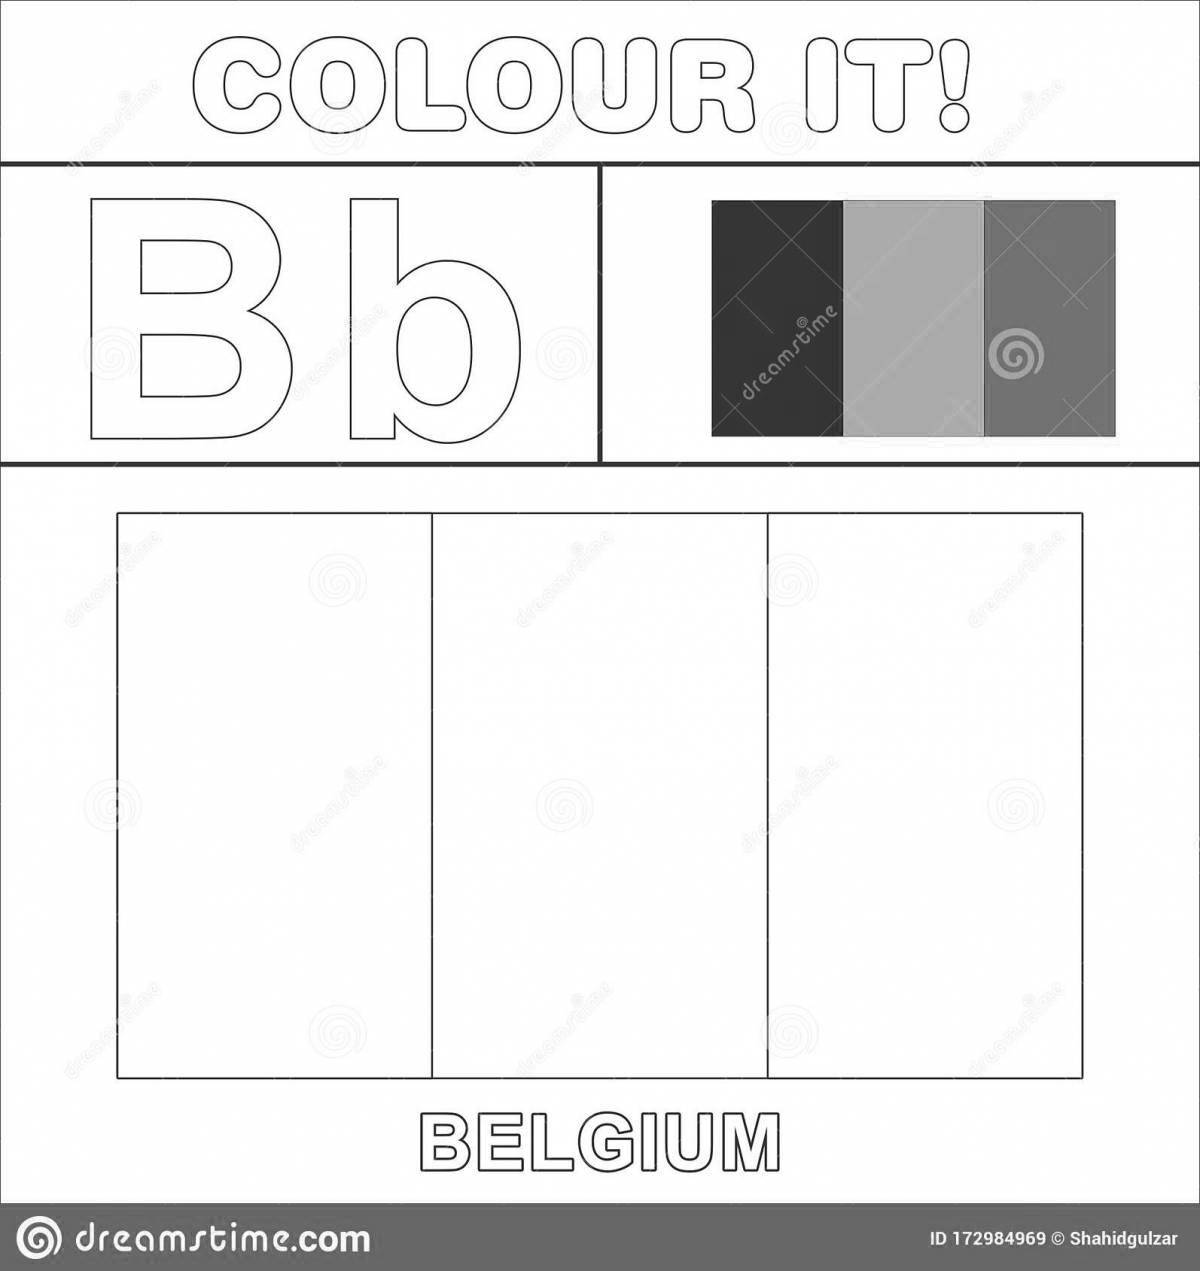 Belgian flag coloring page